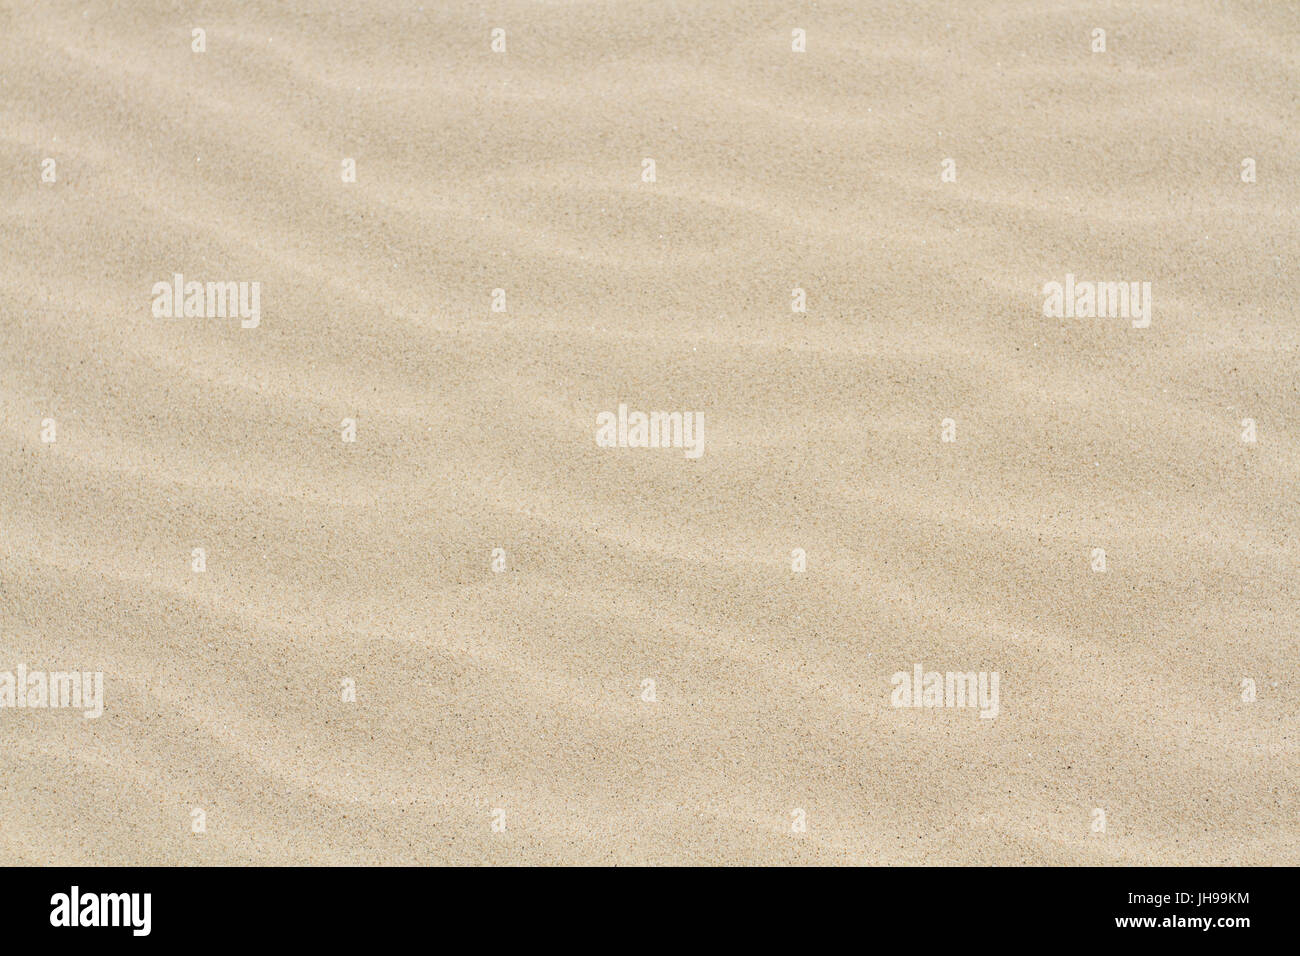 A full frame image of soft, Virgin sand with rippled effect in a beach or desert background image. Stock Photo